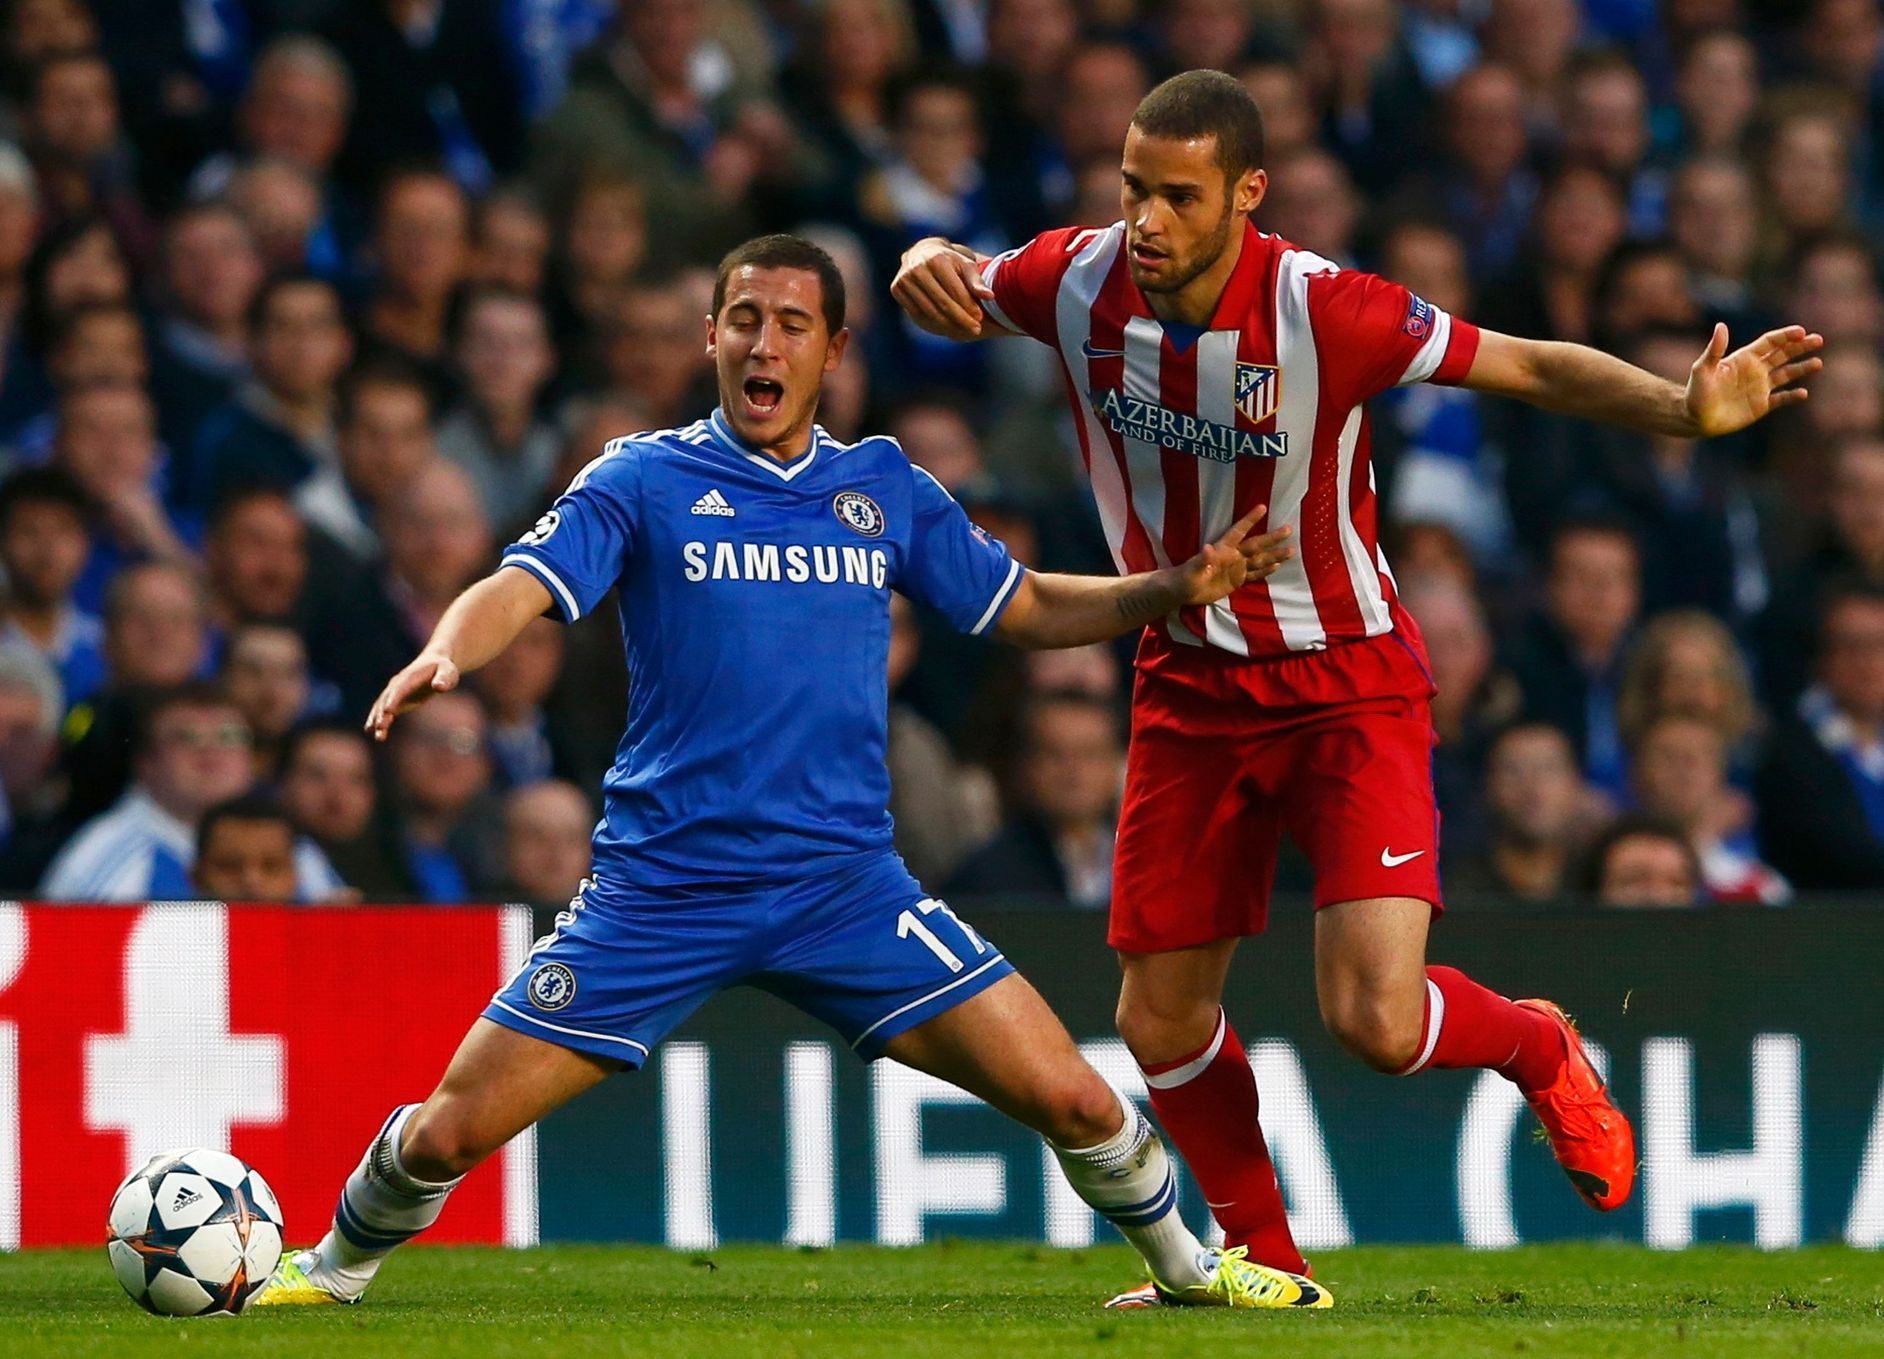 Chelsea's Hazard is fouled by Atletico's Suarez during their Champions League semi-final second leg soccer match at Stamford Bridge in London